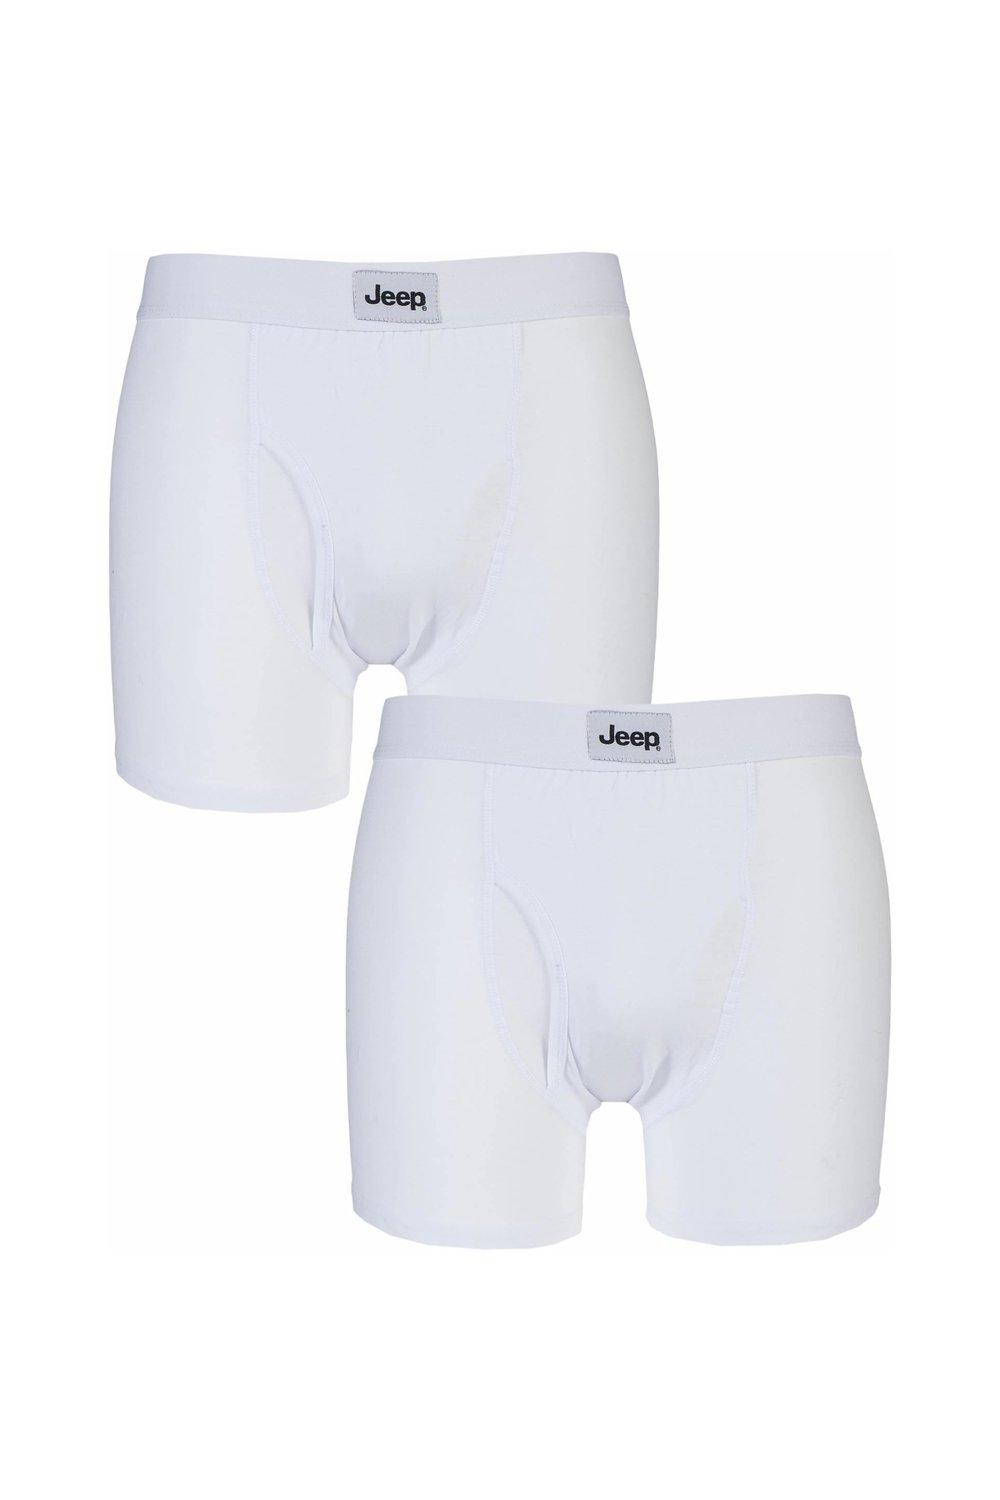 2 Pack Cotton Plain Fitted Key Hole Trunk Boxer Shorts